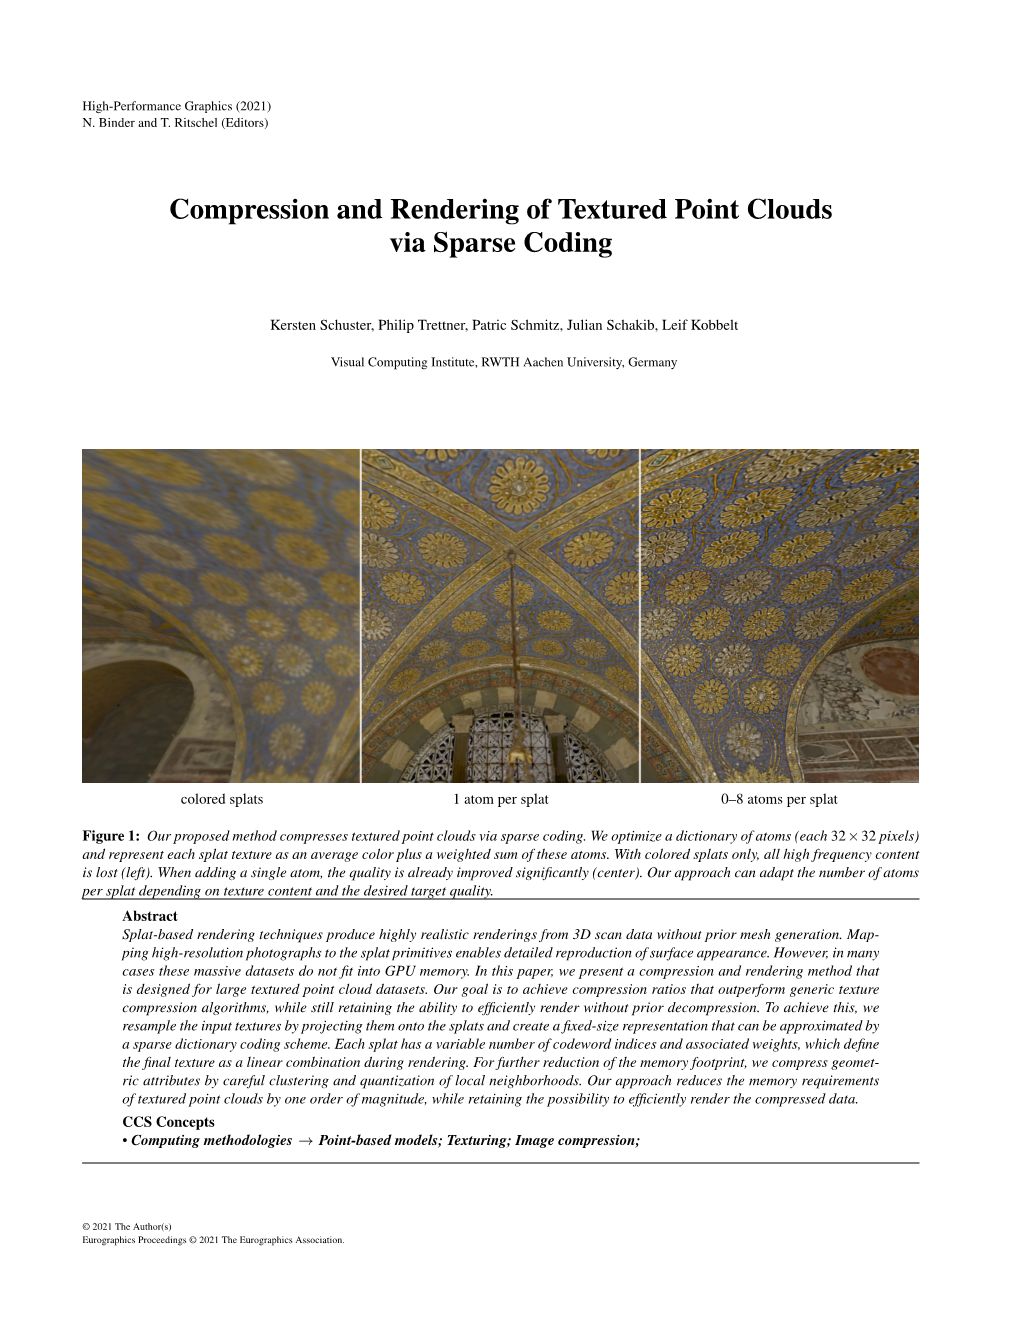 Compression and Rendering of Textured Point Clouds Via Sparse Coding